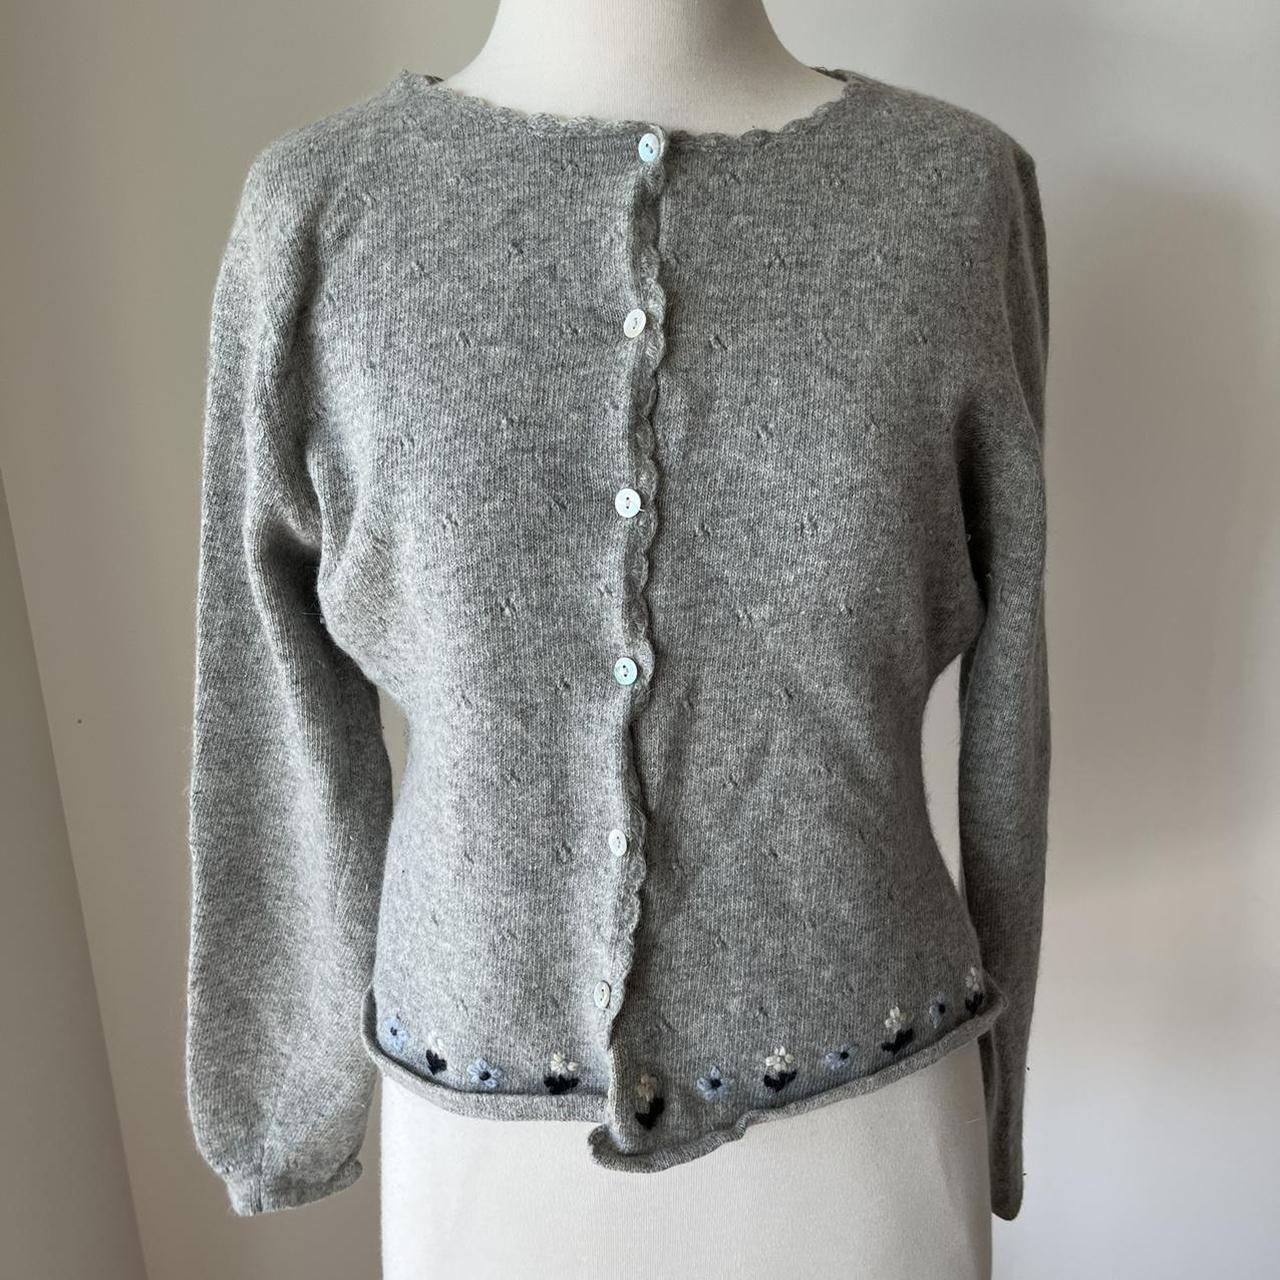 Vintage grey cardigan with floral embroidery on... - Depop